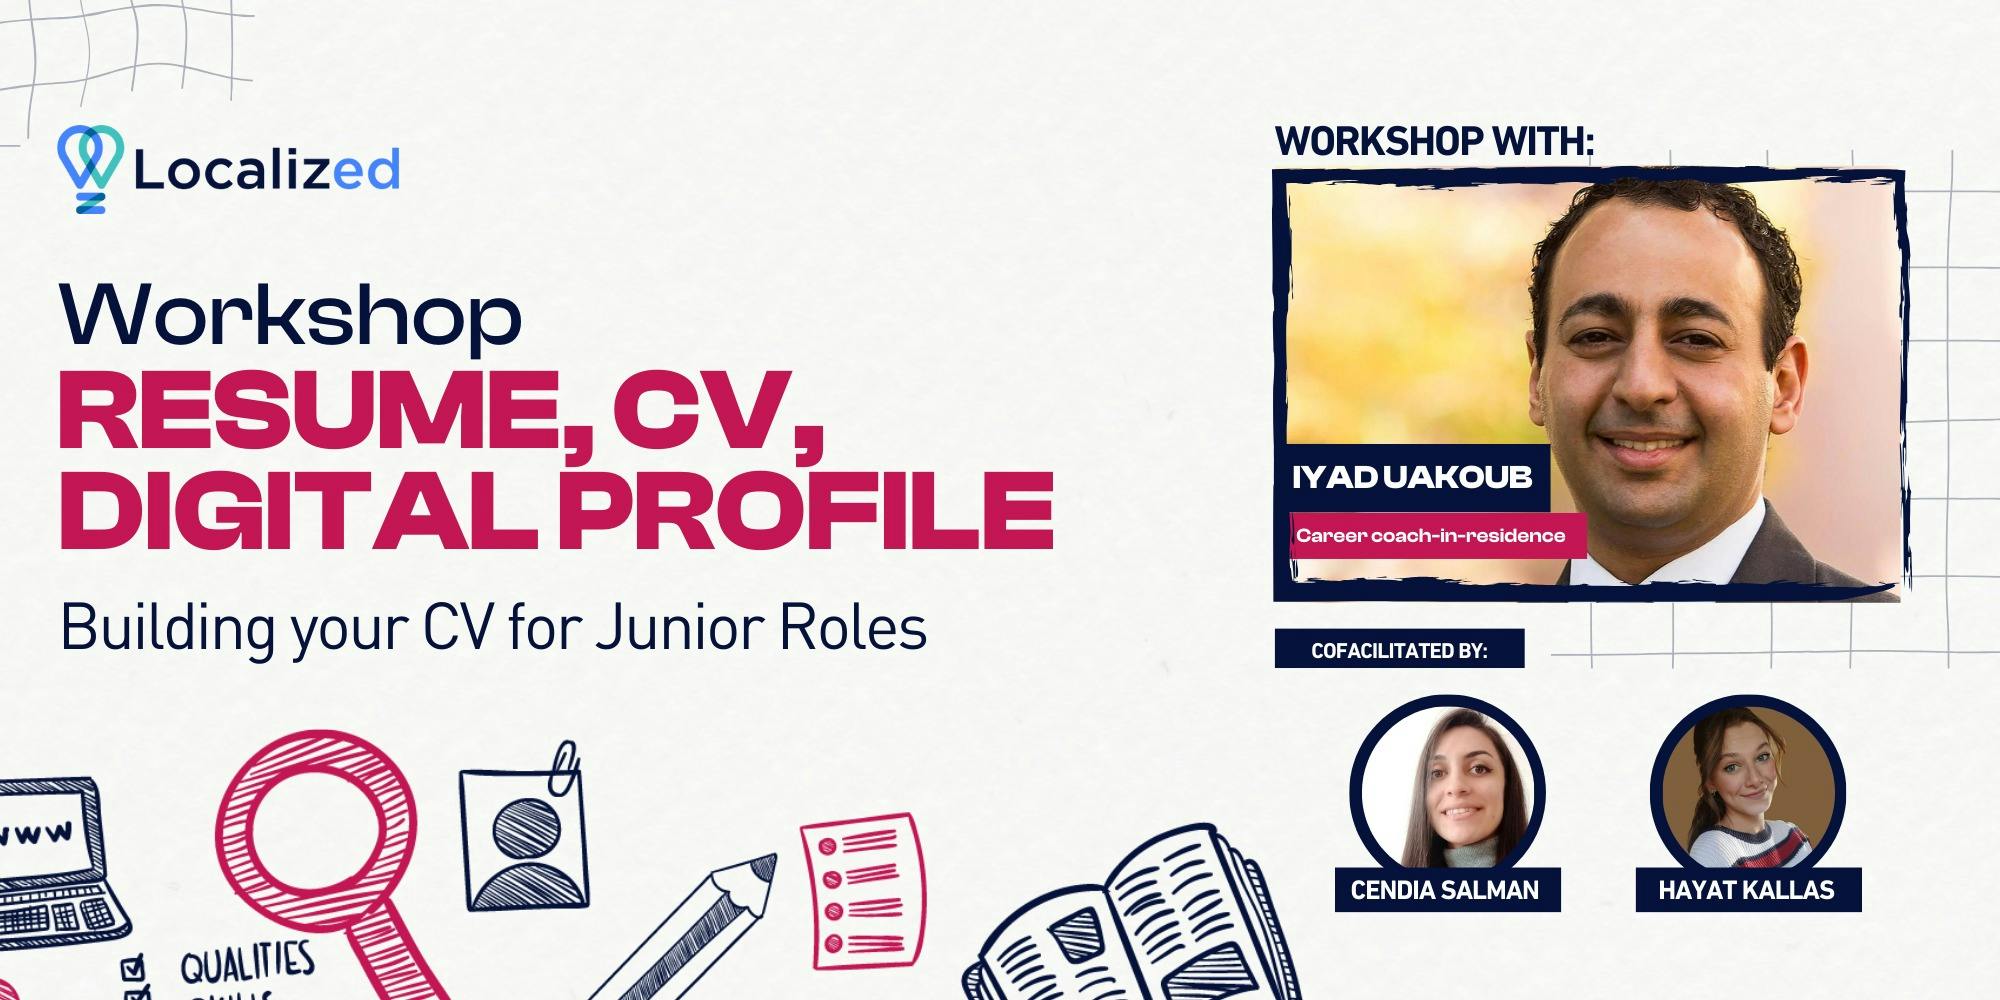 Workshop: Building your CV for Junior Roles (And a GLOBALLY REMOTE position)